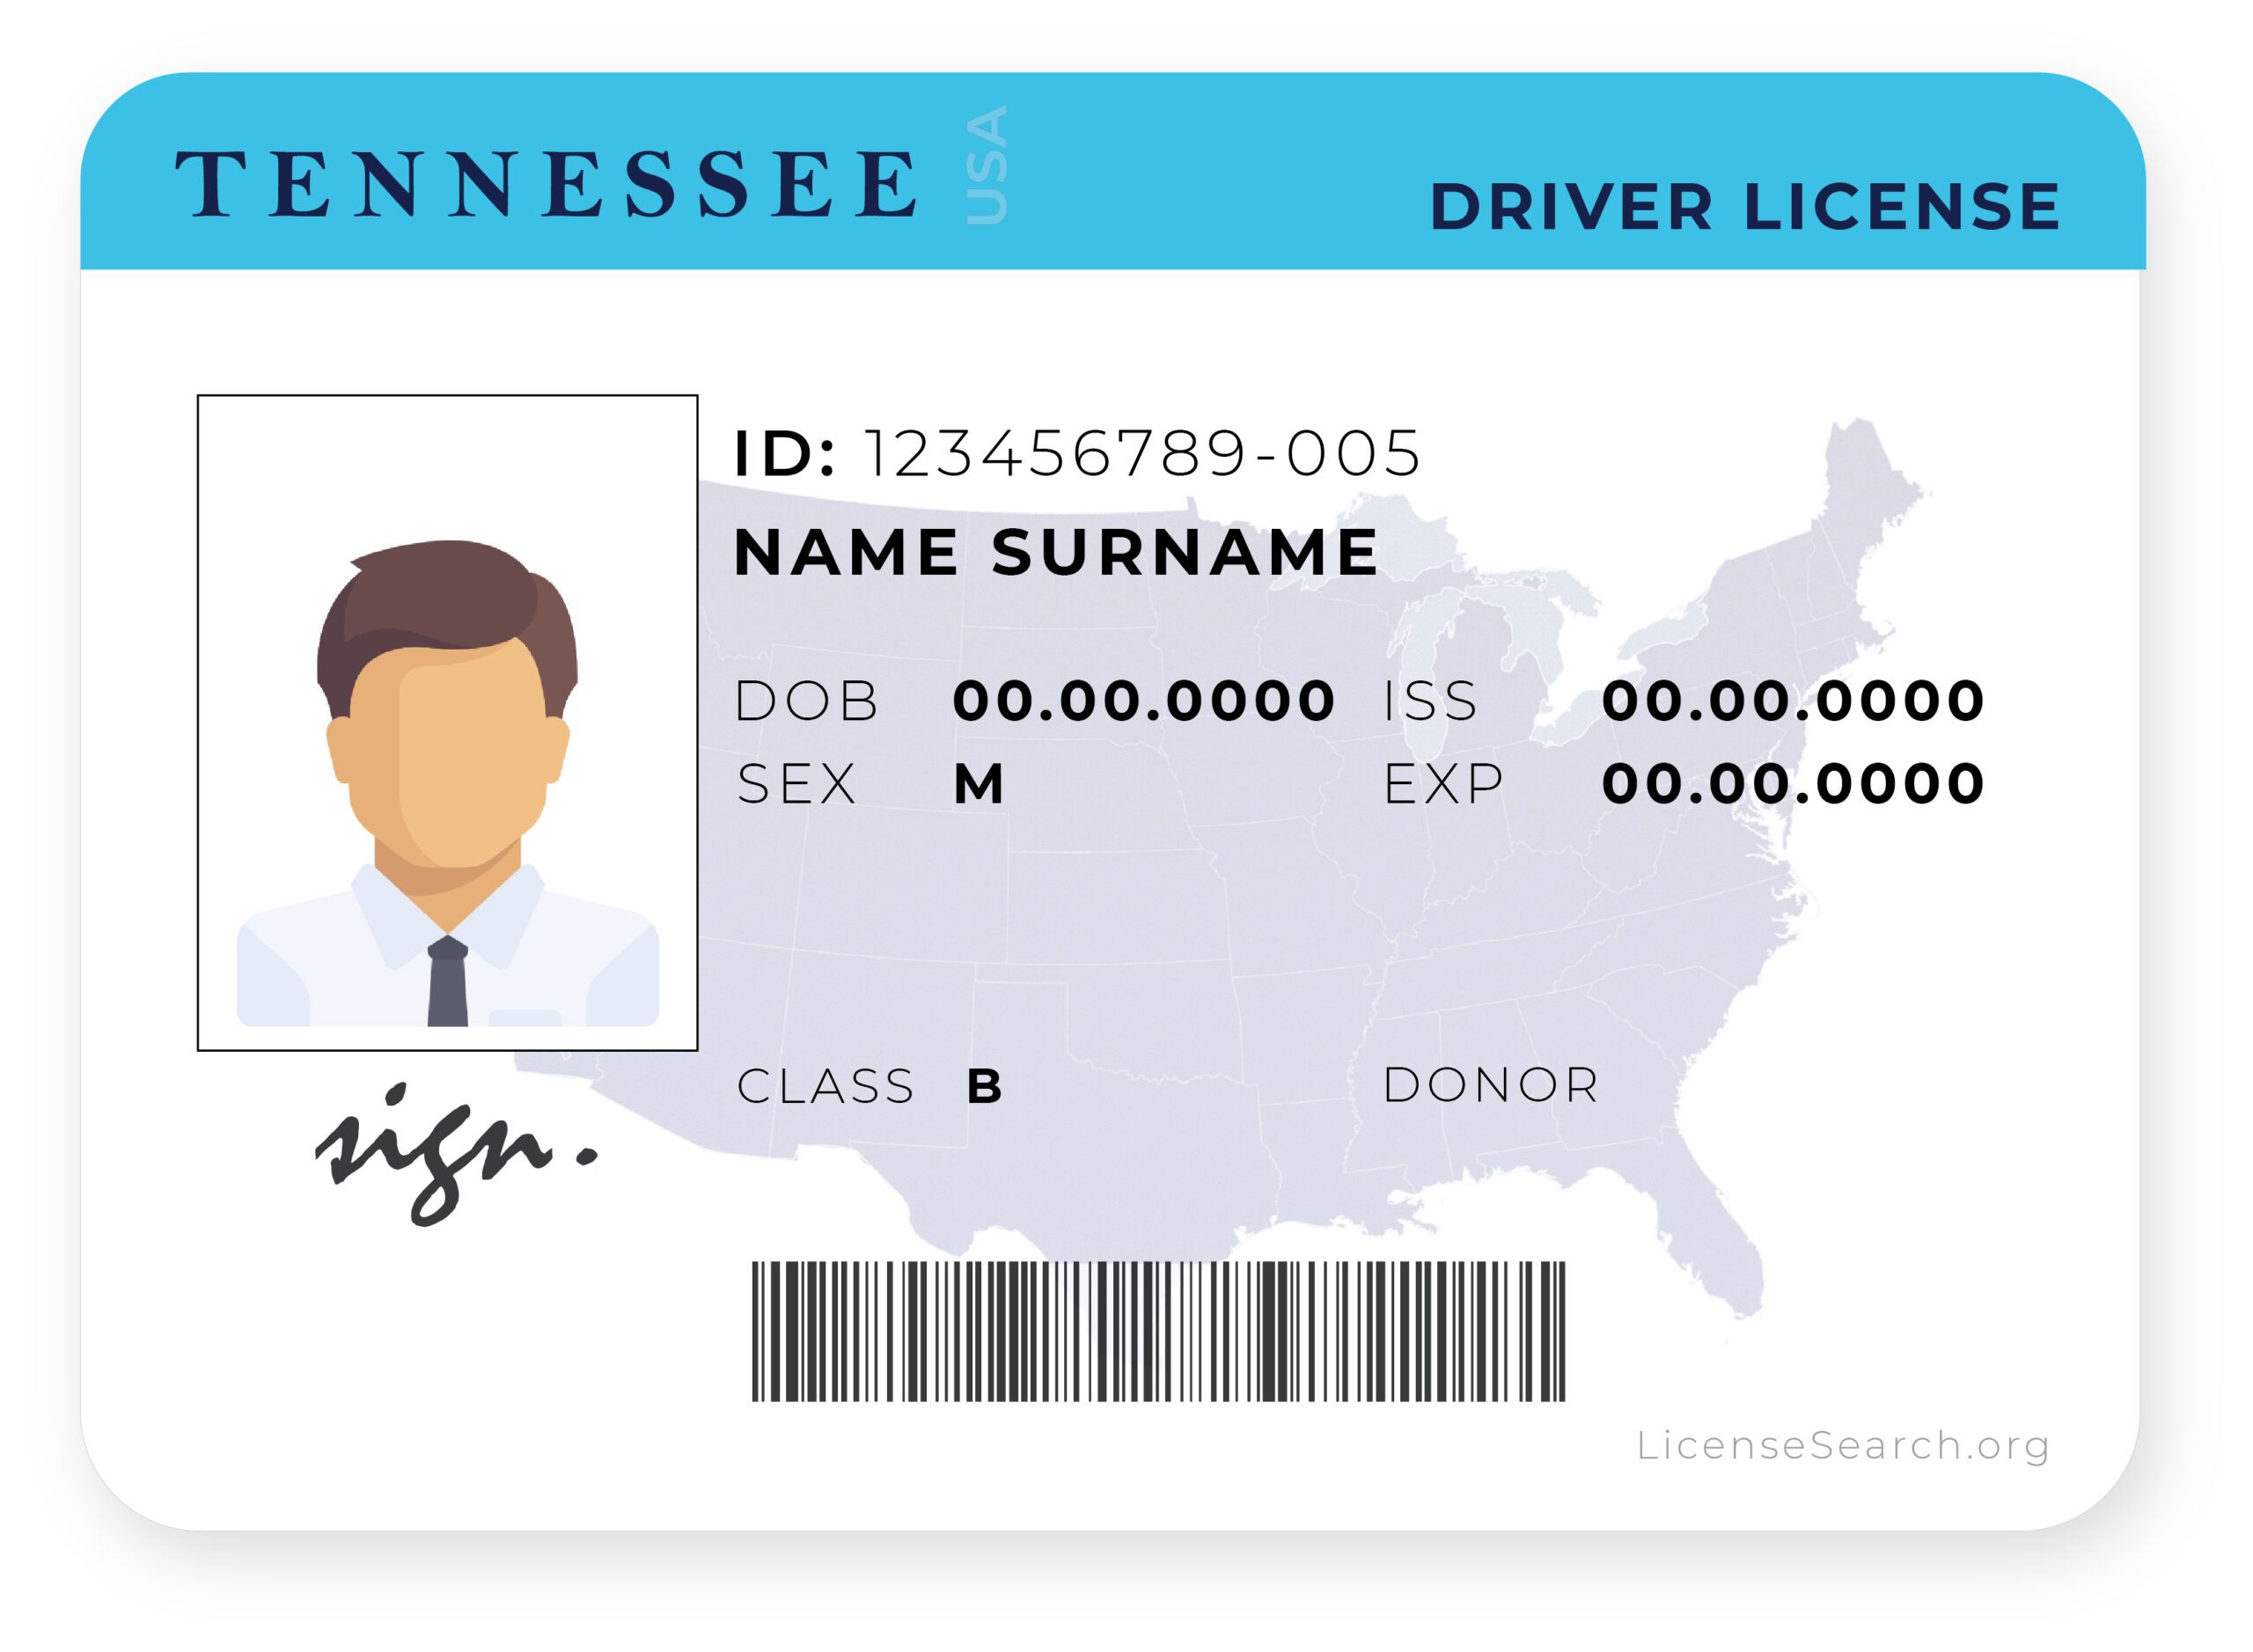 Tennessee Driver License License Lookup